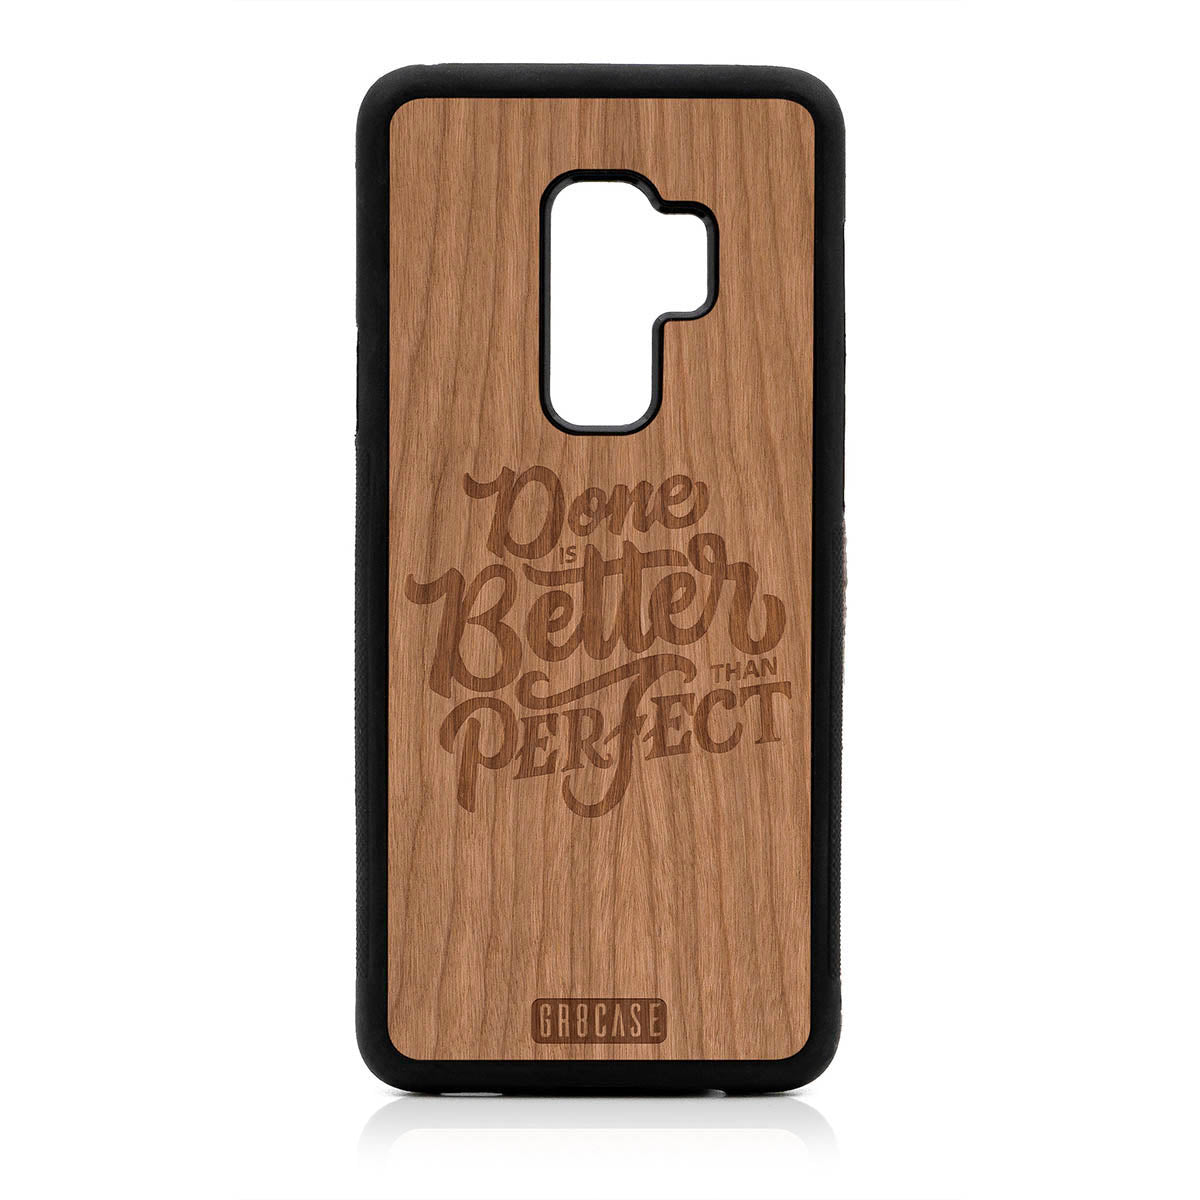 Done Is Better Than Perfect Design Wood Case For Samsung Galaxy S9 Plus by GR8CASE